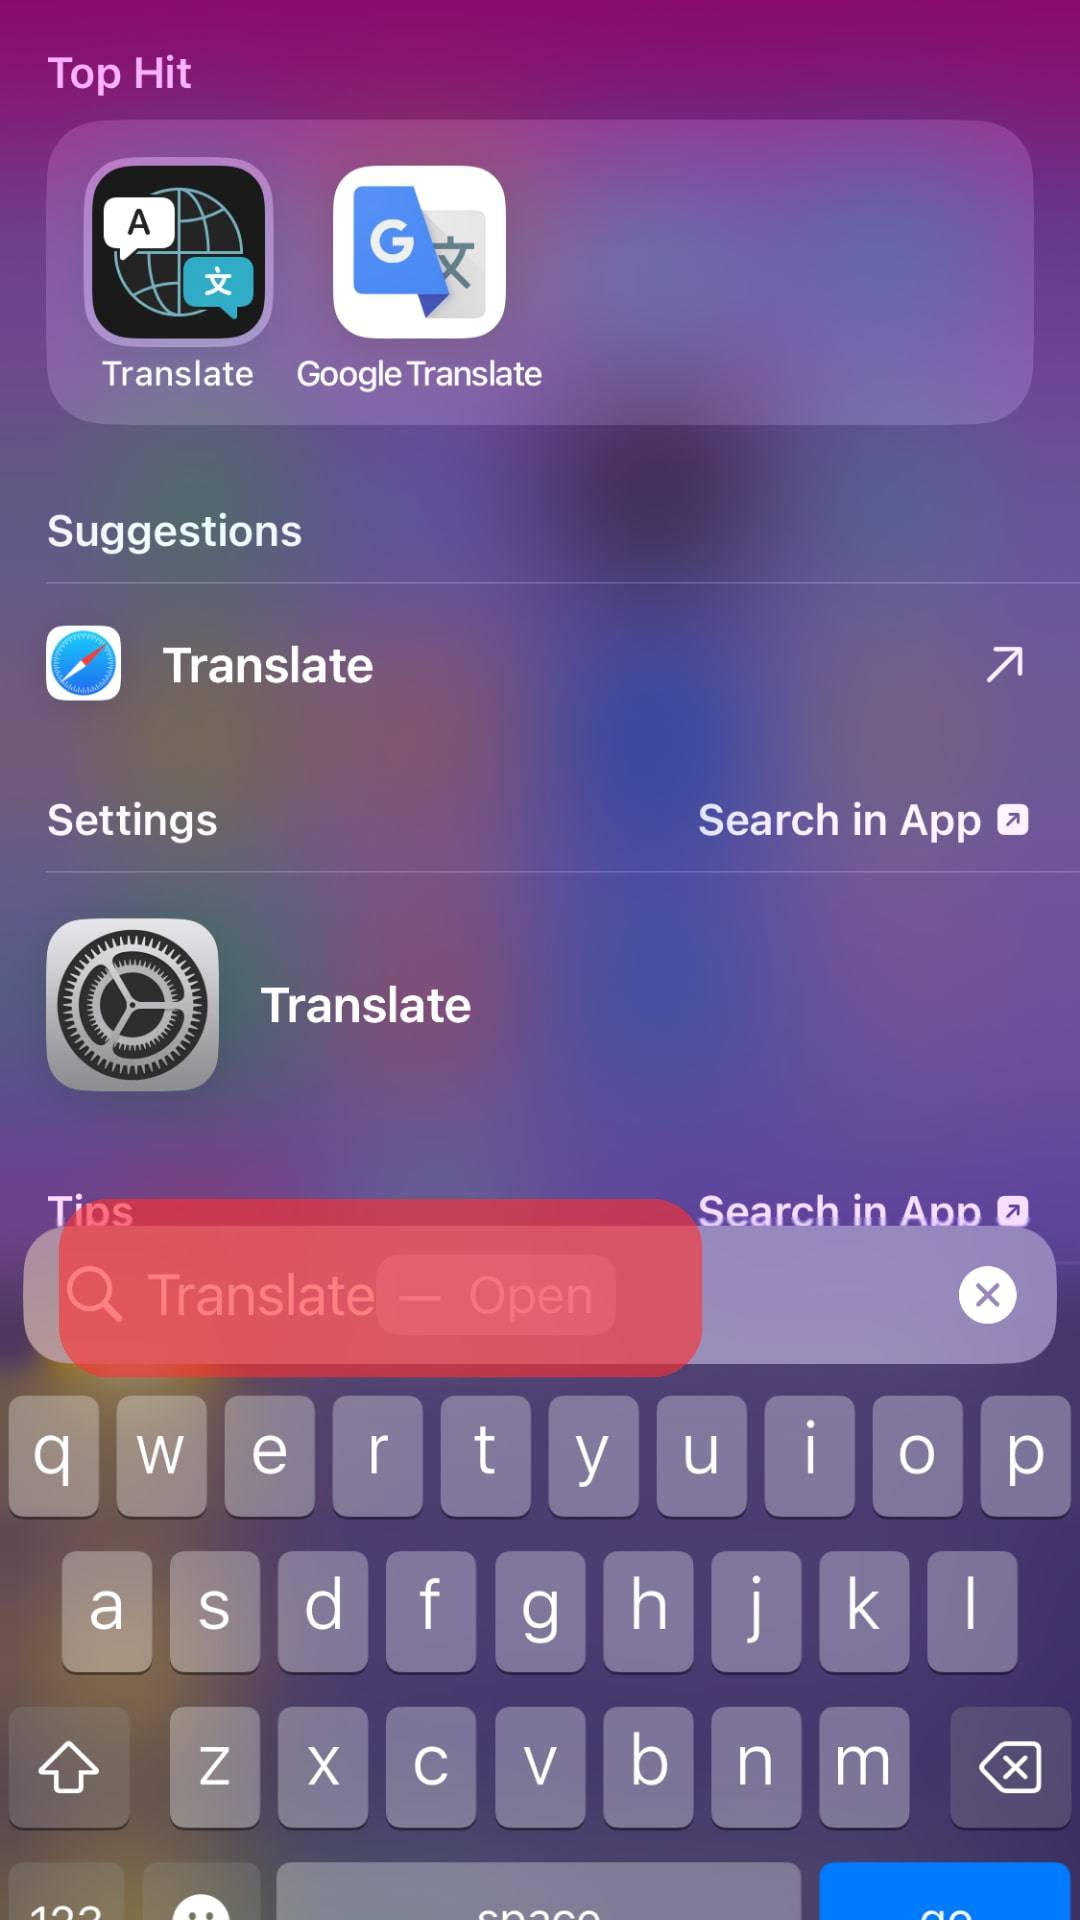 Type ‘Translate’ Into The Search Bar.